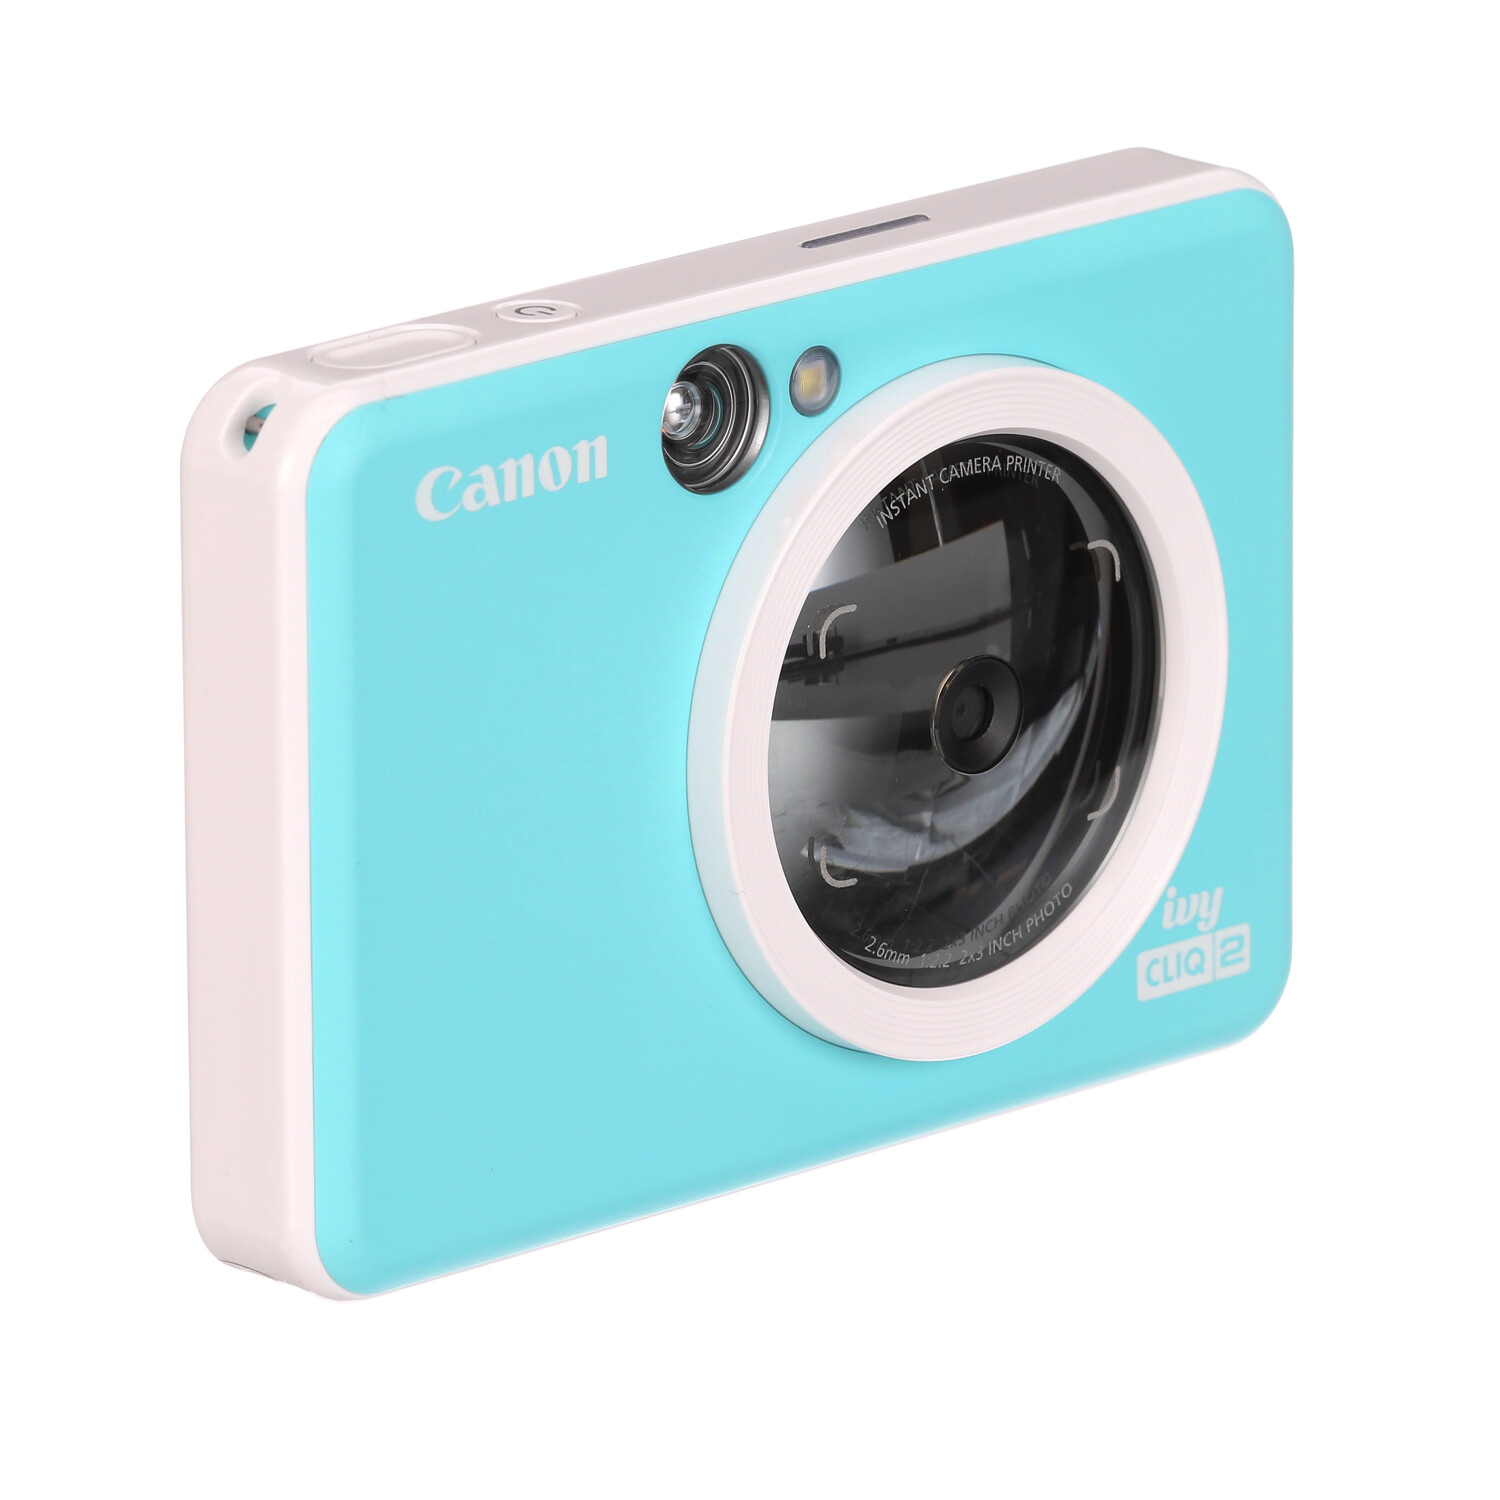 Canon IVY CLIQ+2 review: A fun instant camera and printer for all ages